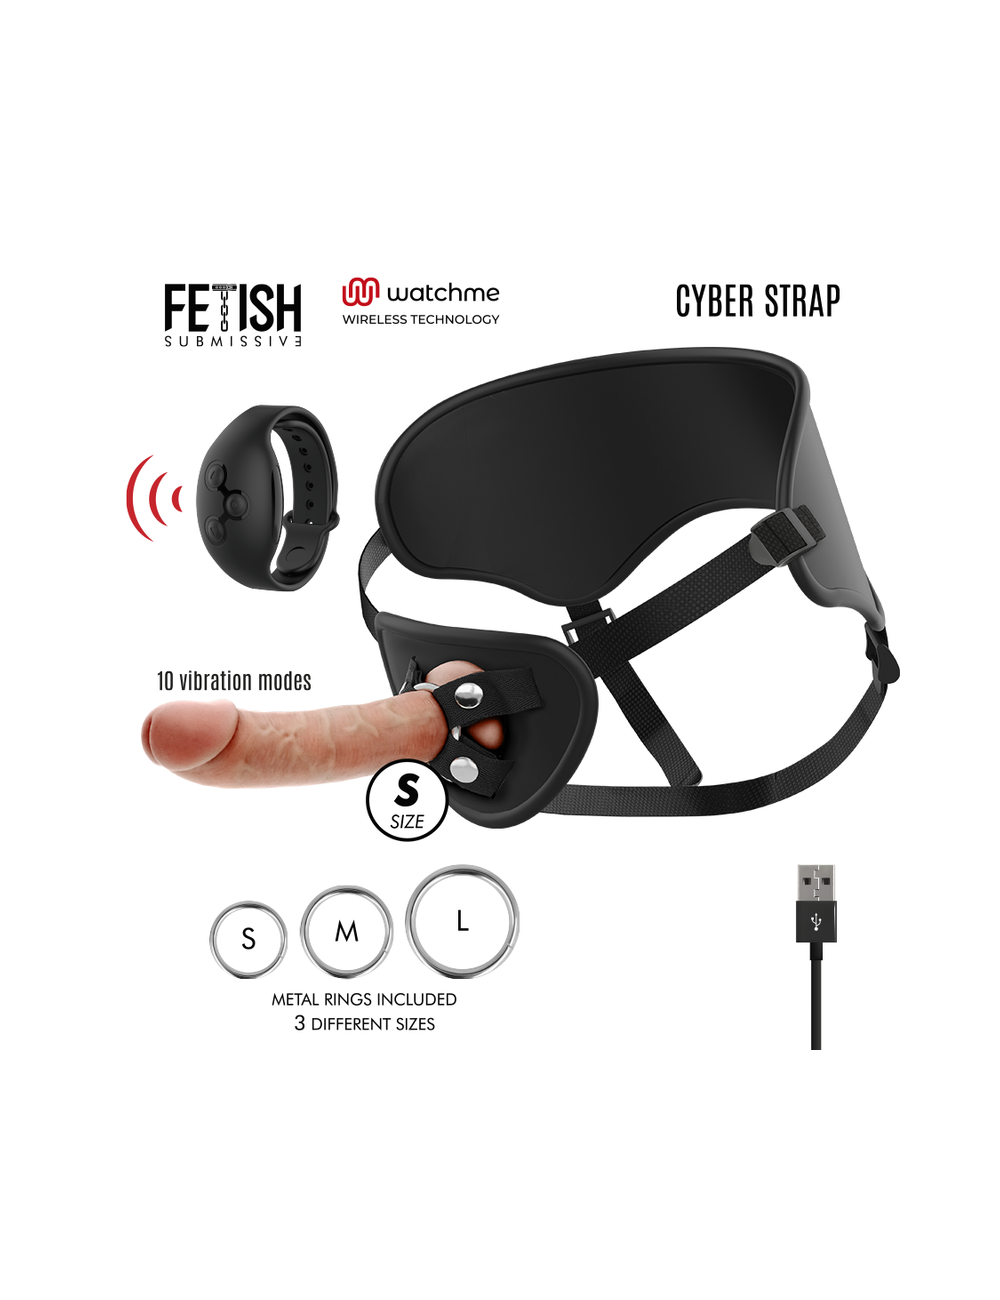 Sextoys - Accessoires - CYBER STRAP REMOTE CONTROL HARNESS WATCME TECHNOLOGY S - FETISH SUBMISSIVE CYBER STRAP